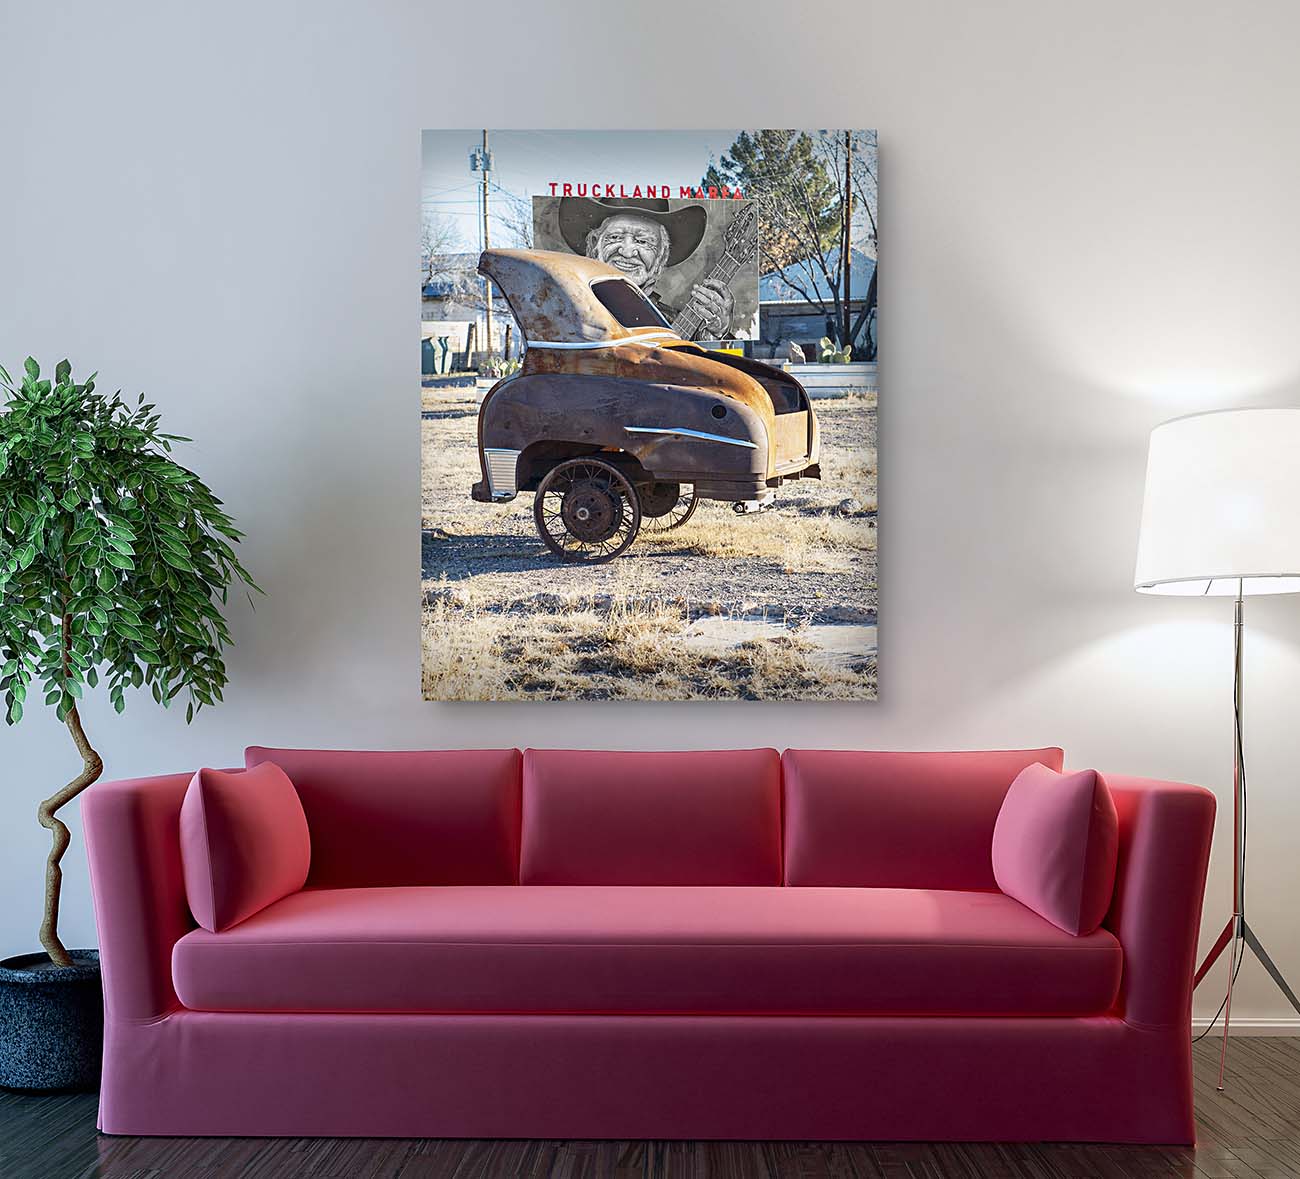 Marfa Truckland photograph by Doug LaRue large print over a red couch